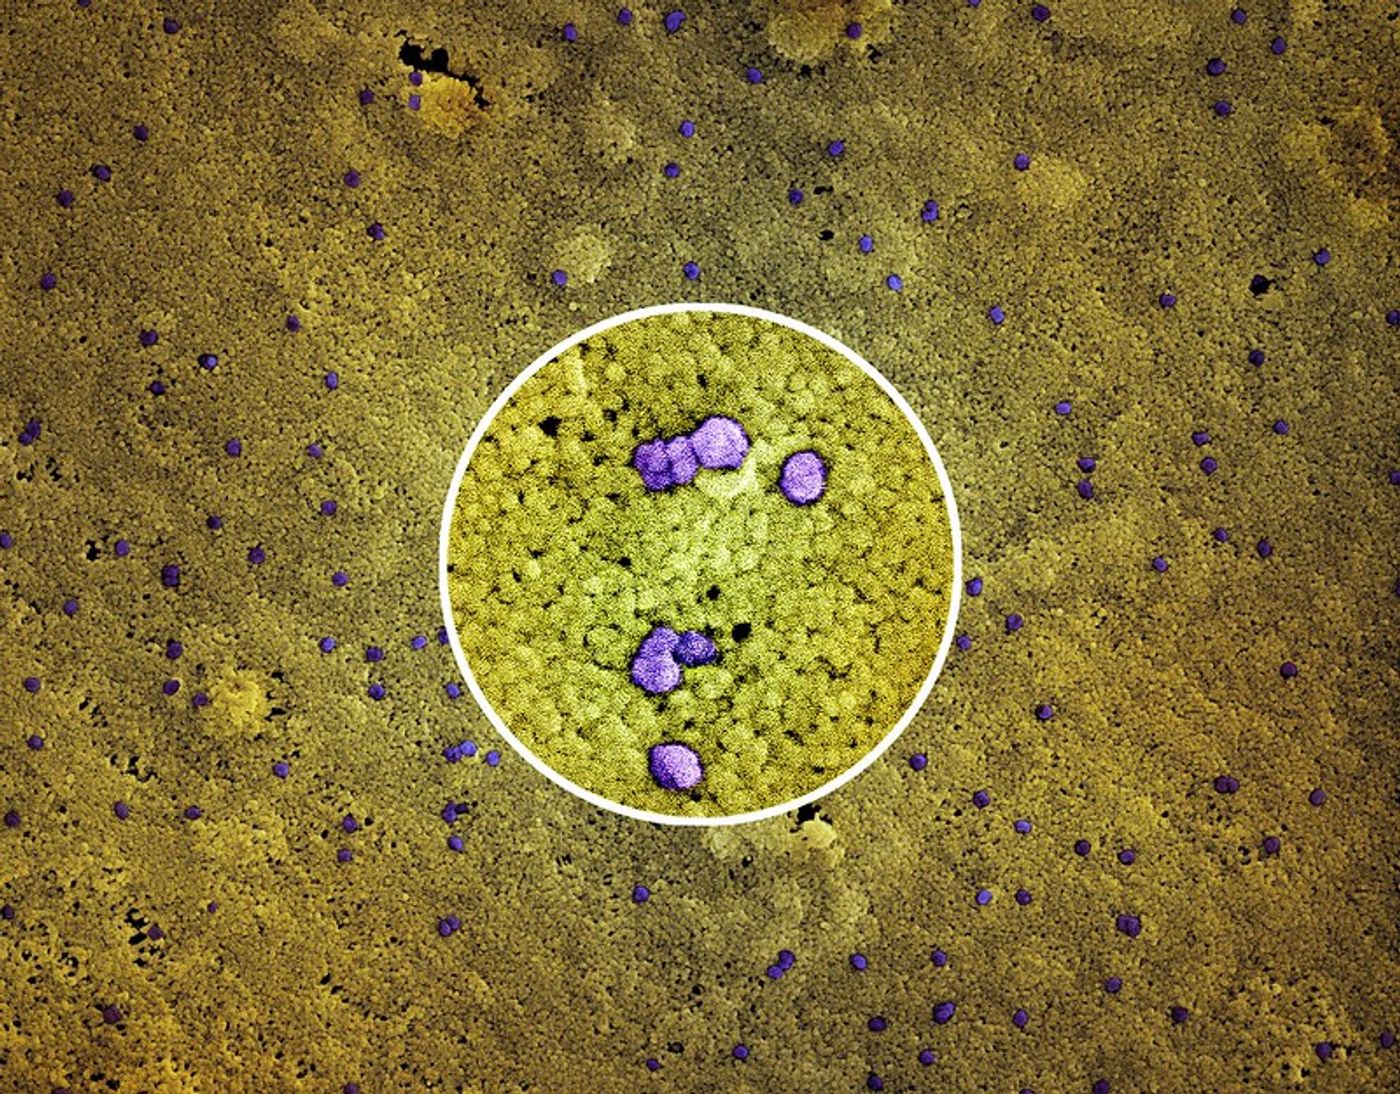 Colorized scanning electron micrograph of a VERO E6 cell (yellow/green) infected with the Omicron strain of SARS-CoV-2 virus particles (purple), isolated from a patient sample. A close-up image of virus particles is featured center. Captured at the NIAID Integrated Research Facility (IRF) in Fort Detrick, Maryland. Credit: NIAID